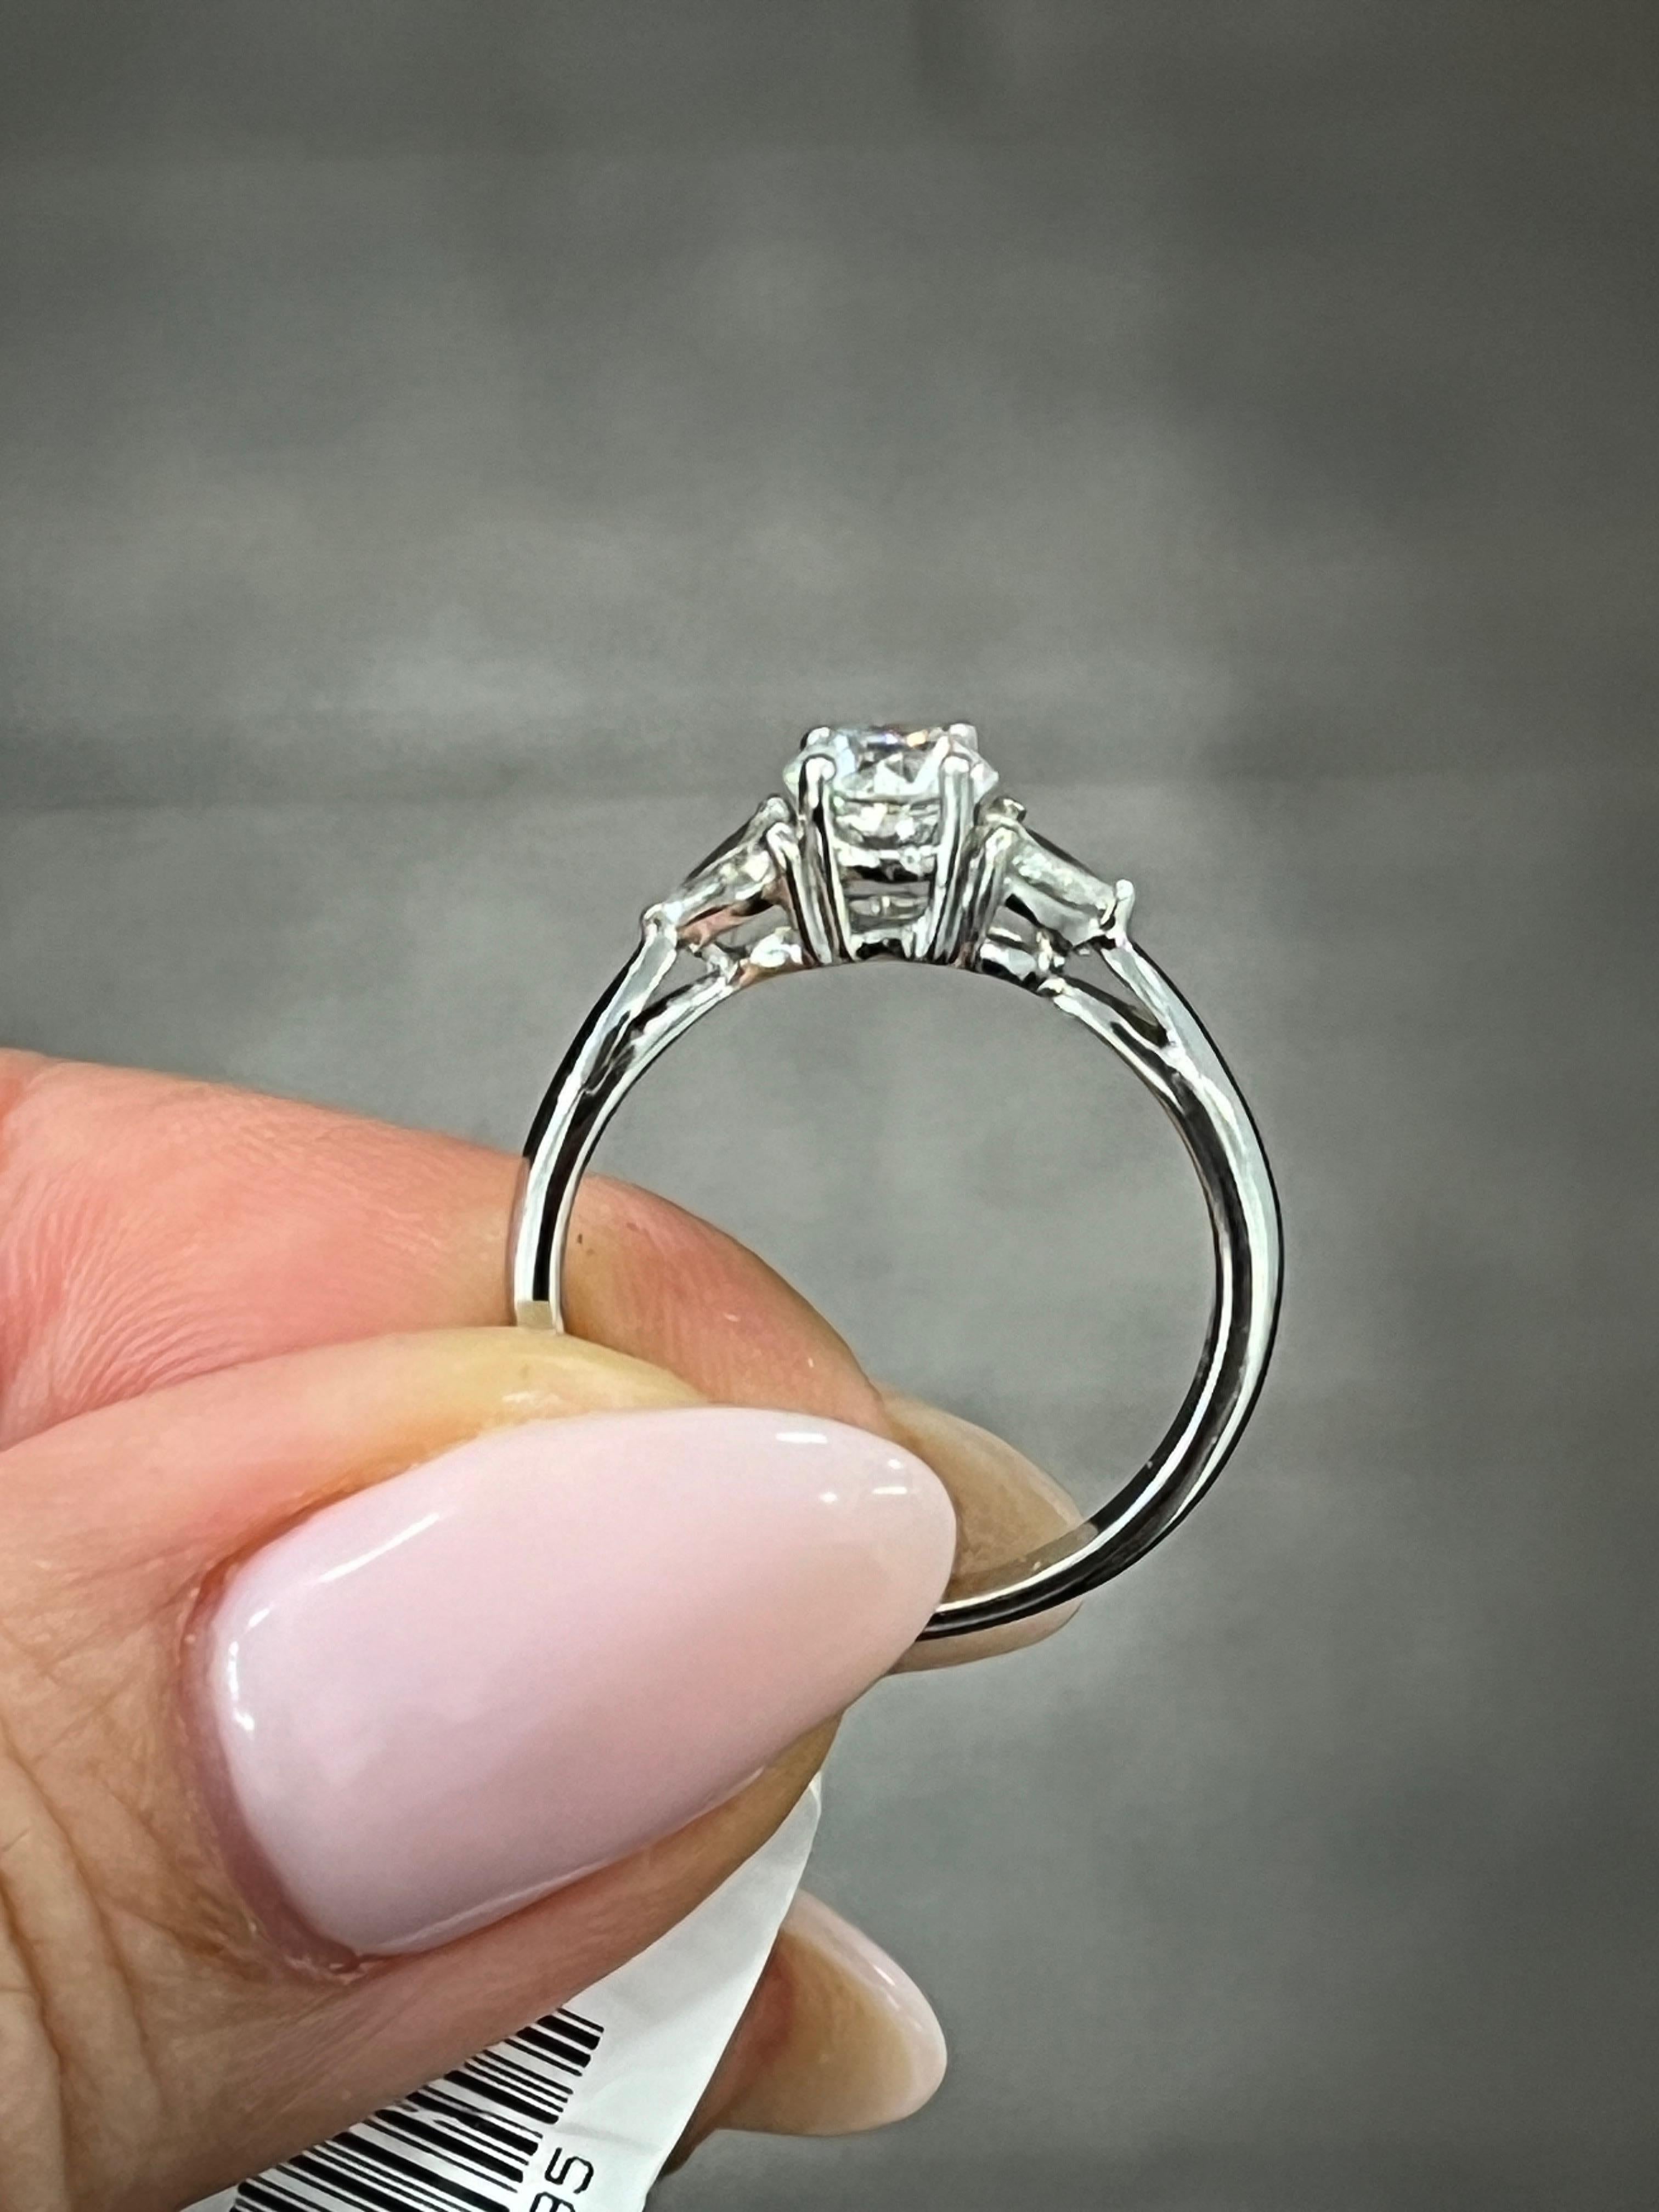 This beautiful 18k white gold ring features a stunning round diamond with a total carat weight of 0.86. The diamond is of F/G color grade and VS1/VS2 clarity grade, ensuring the highest quality sparkle. The ring is size 5.25 and has sizable options